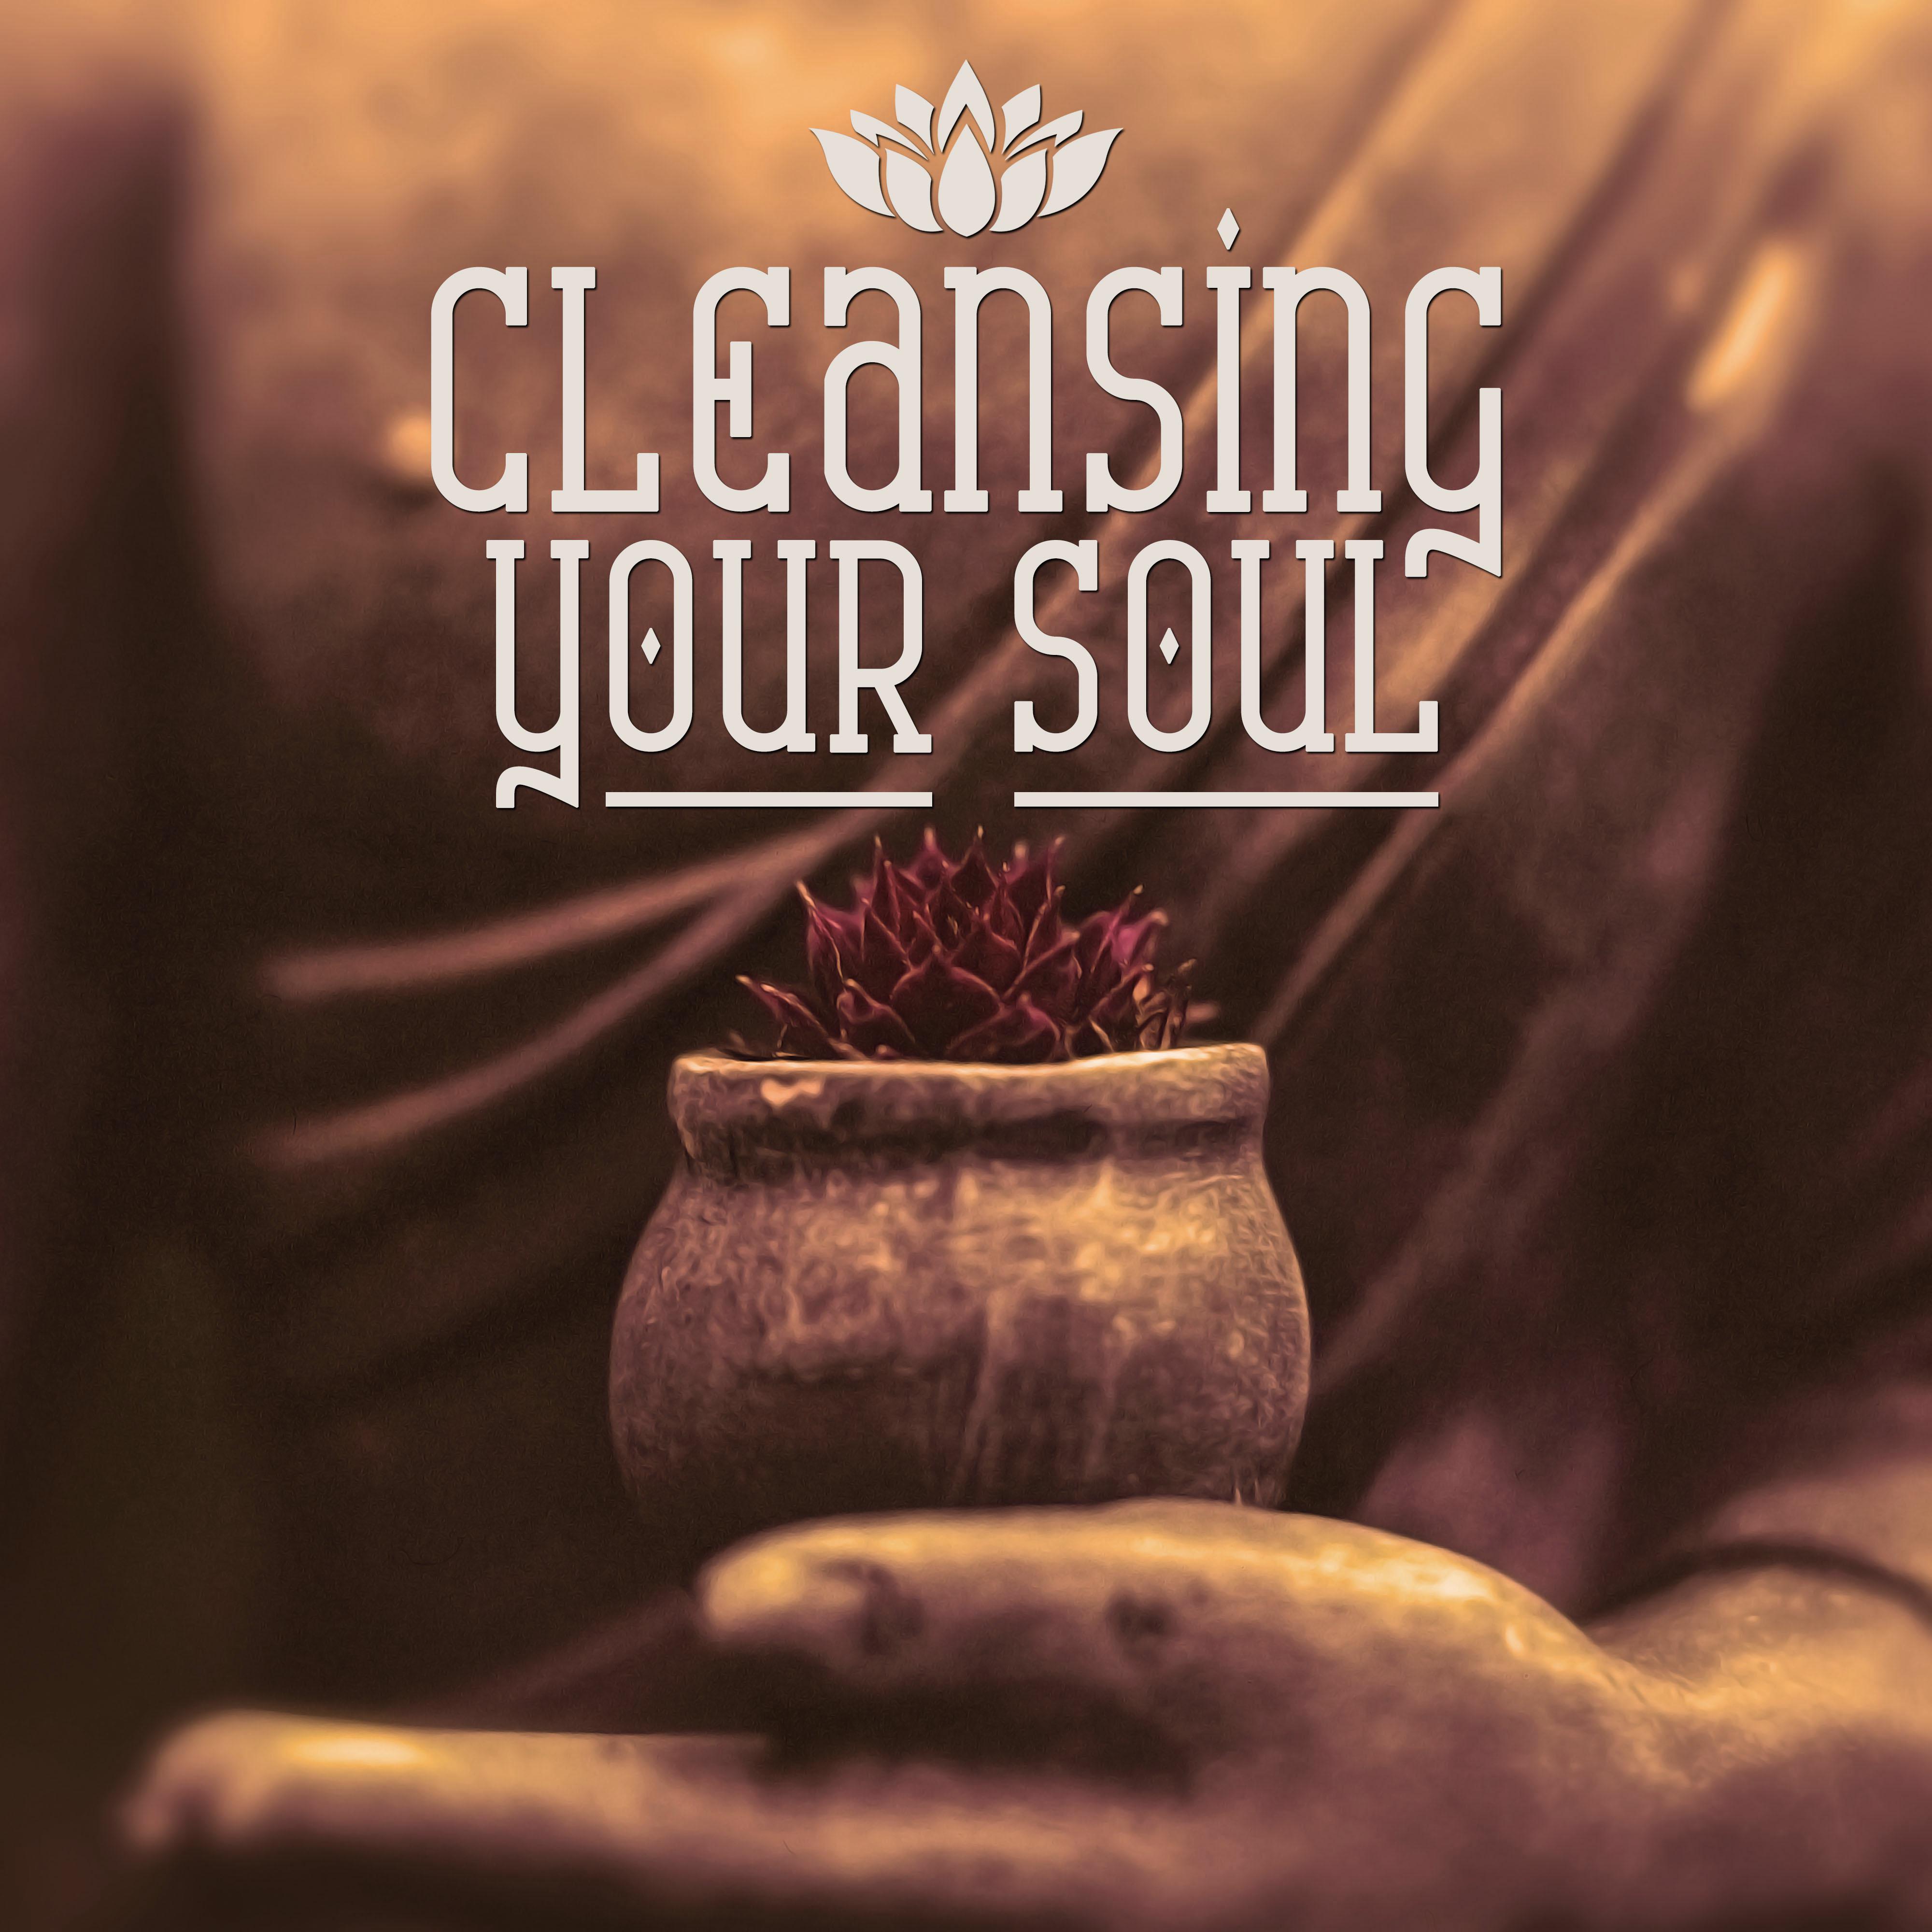 Cleansing Your Soul - Instrumental Music, Soothing Sounds for Massage, Time for You, Gentle Touch, Calming Music, Feel the Spirit